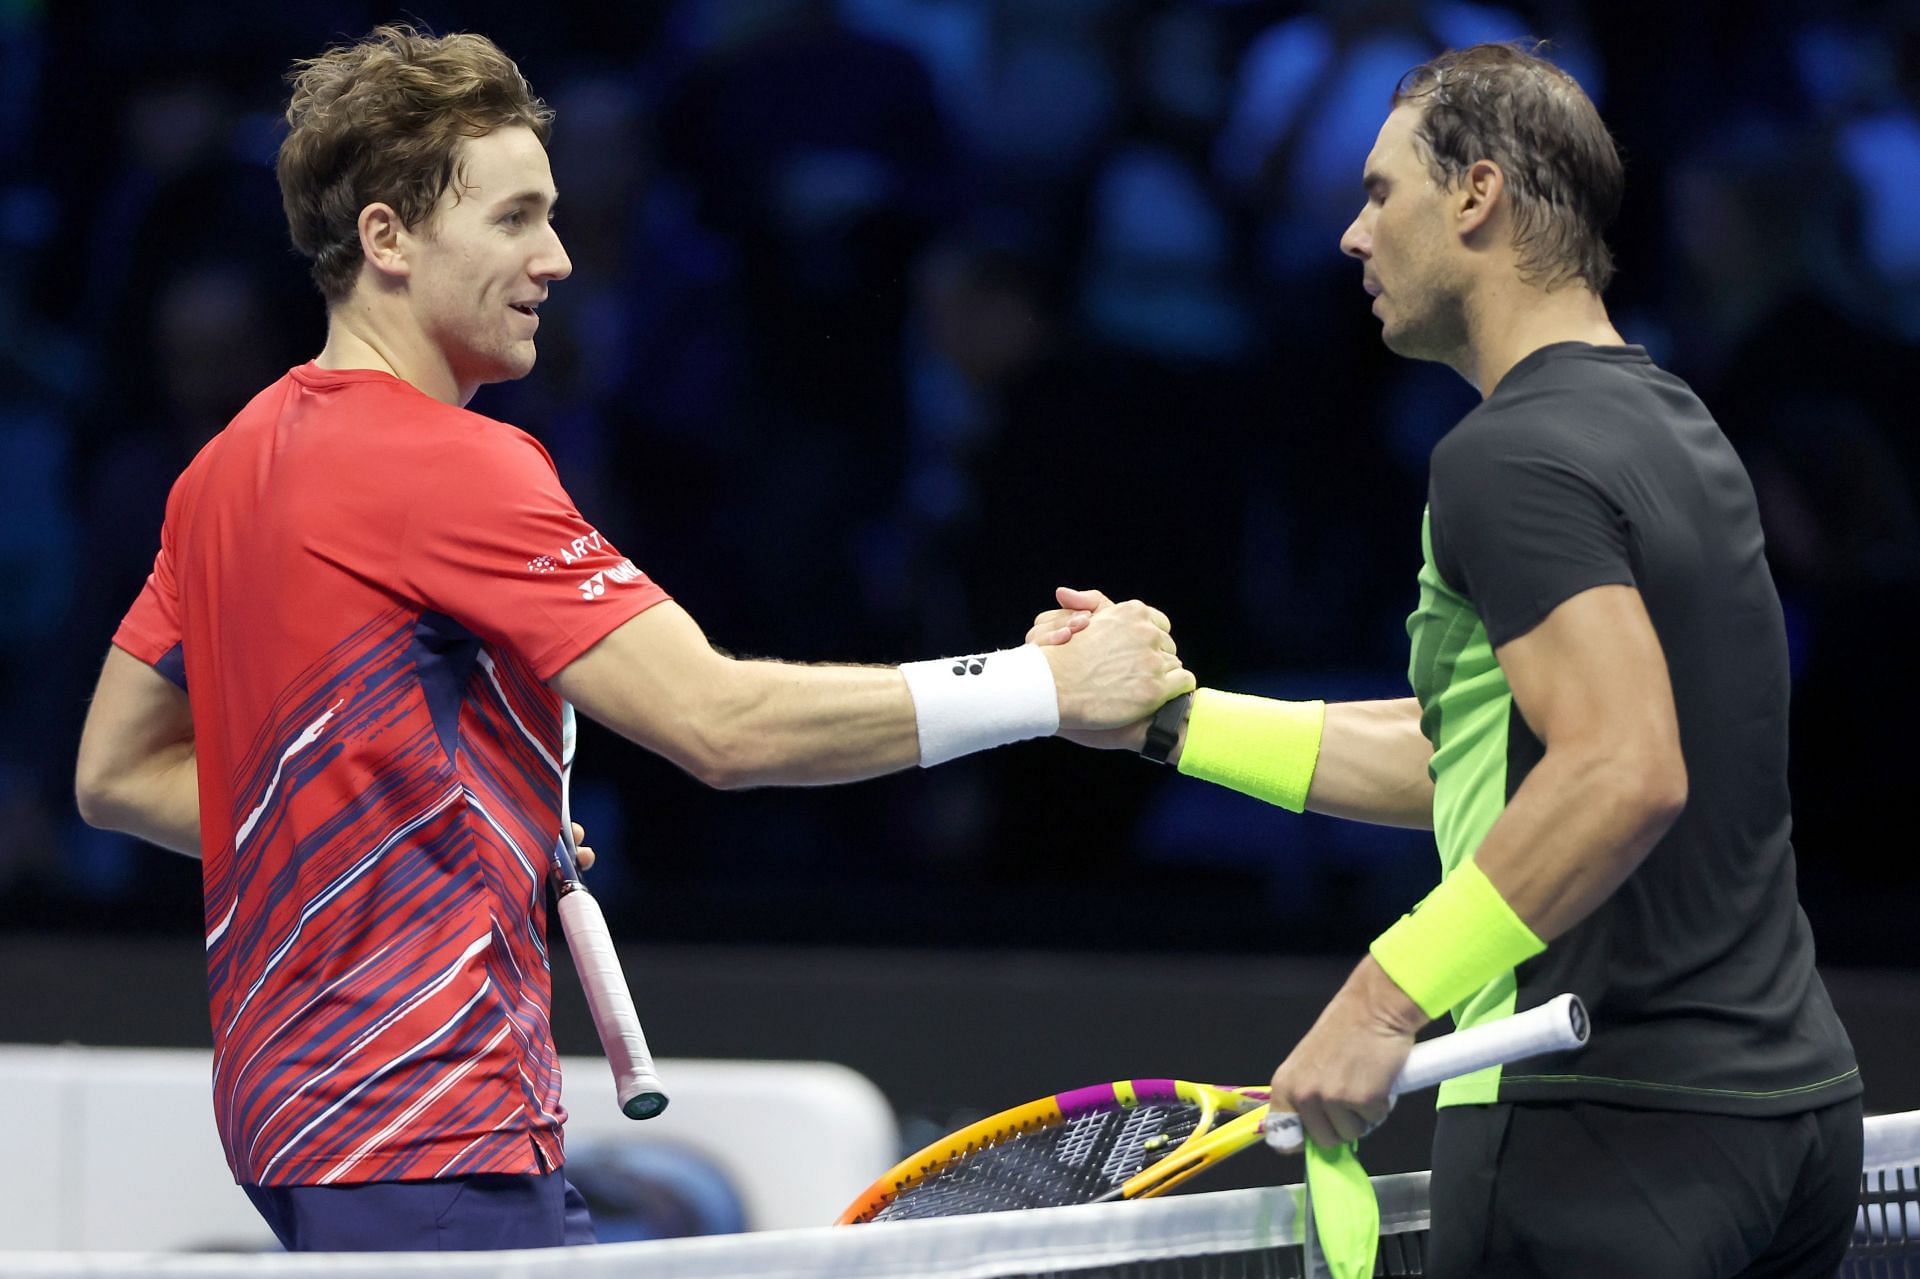 Nitto ATP Finals - Day Five